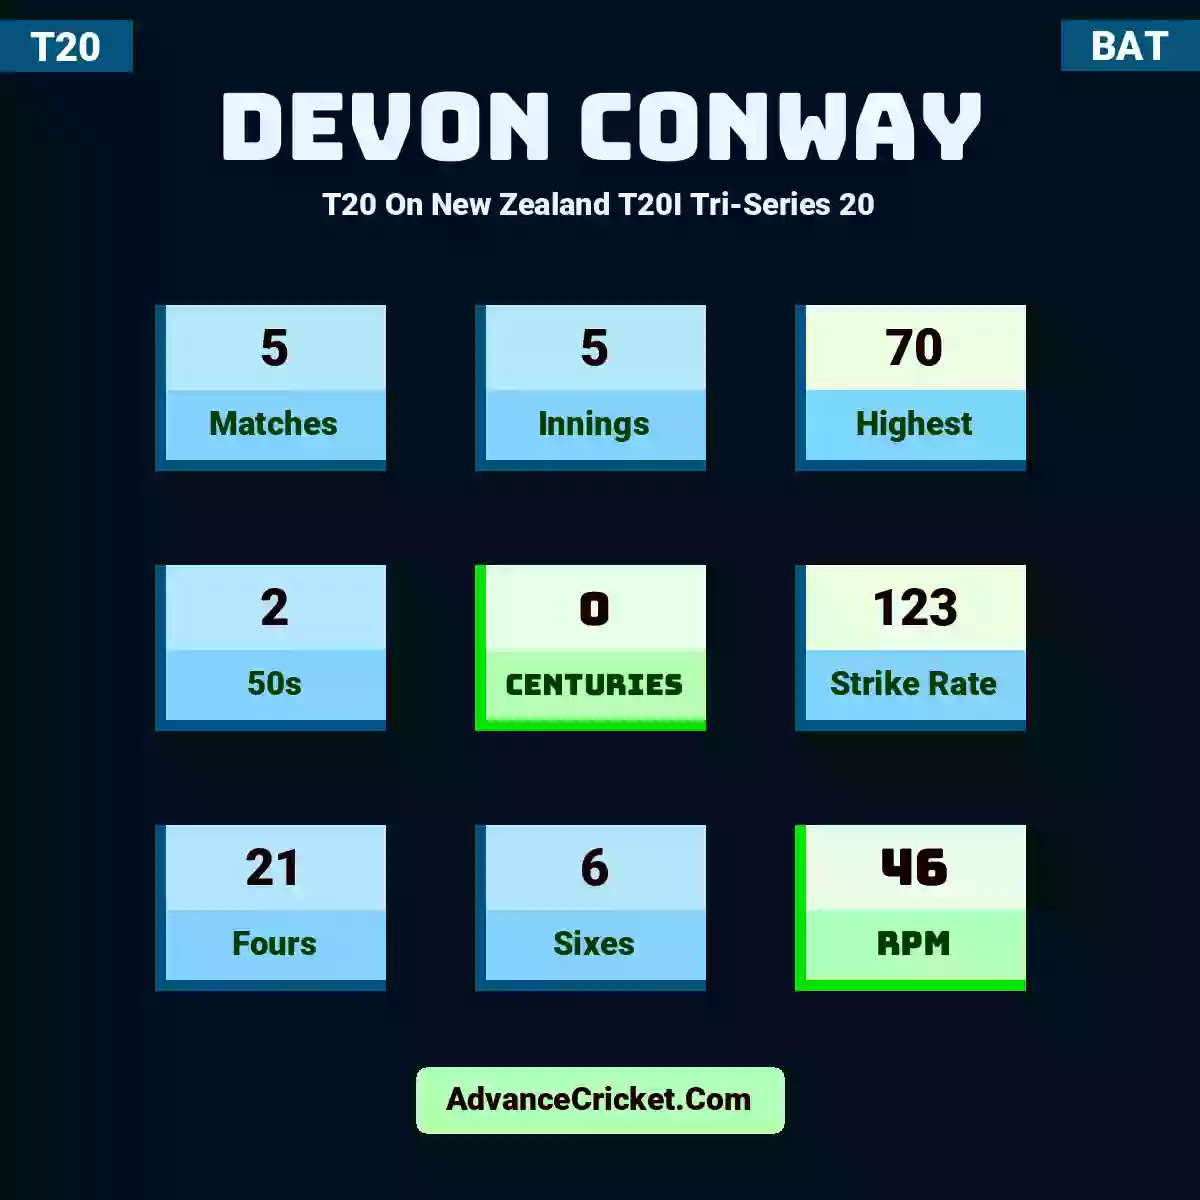 Devon Conway T20  On New Zealand T20I Tri-Series 20, Devon Conway played 5 matches, scored 70 runs as highest, 2 half-centuries, and 0 centuries, with a strike rate of 123. D.Conway hit 21 fours and 6 sixes, with an RPM of 46.